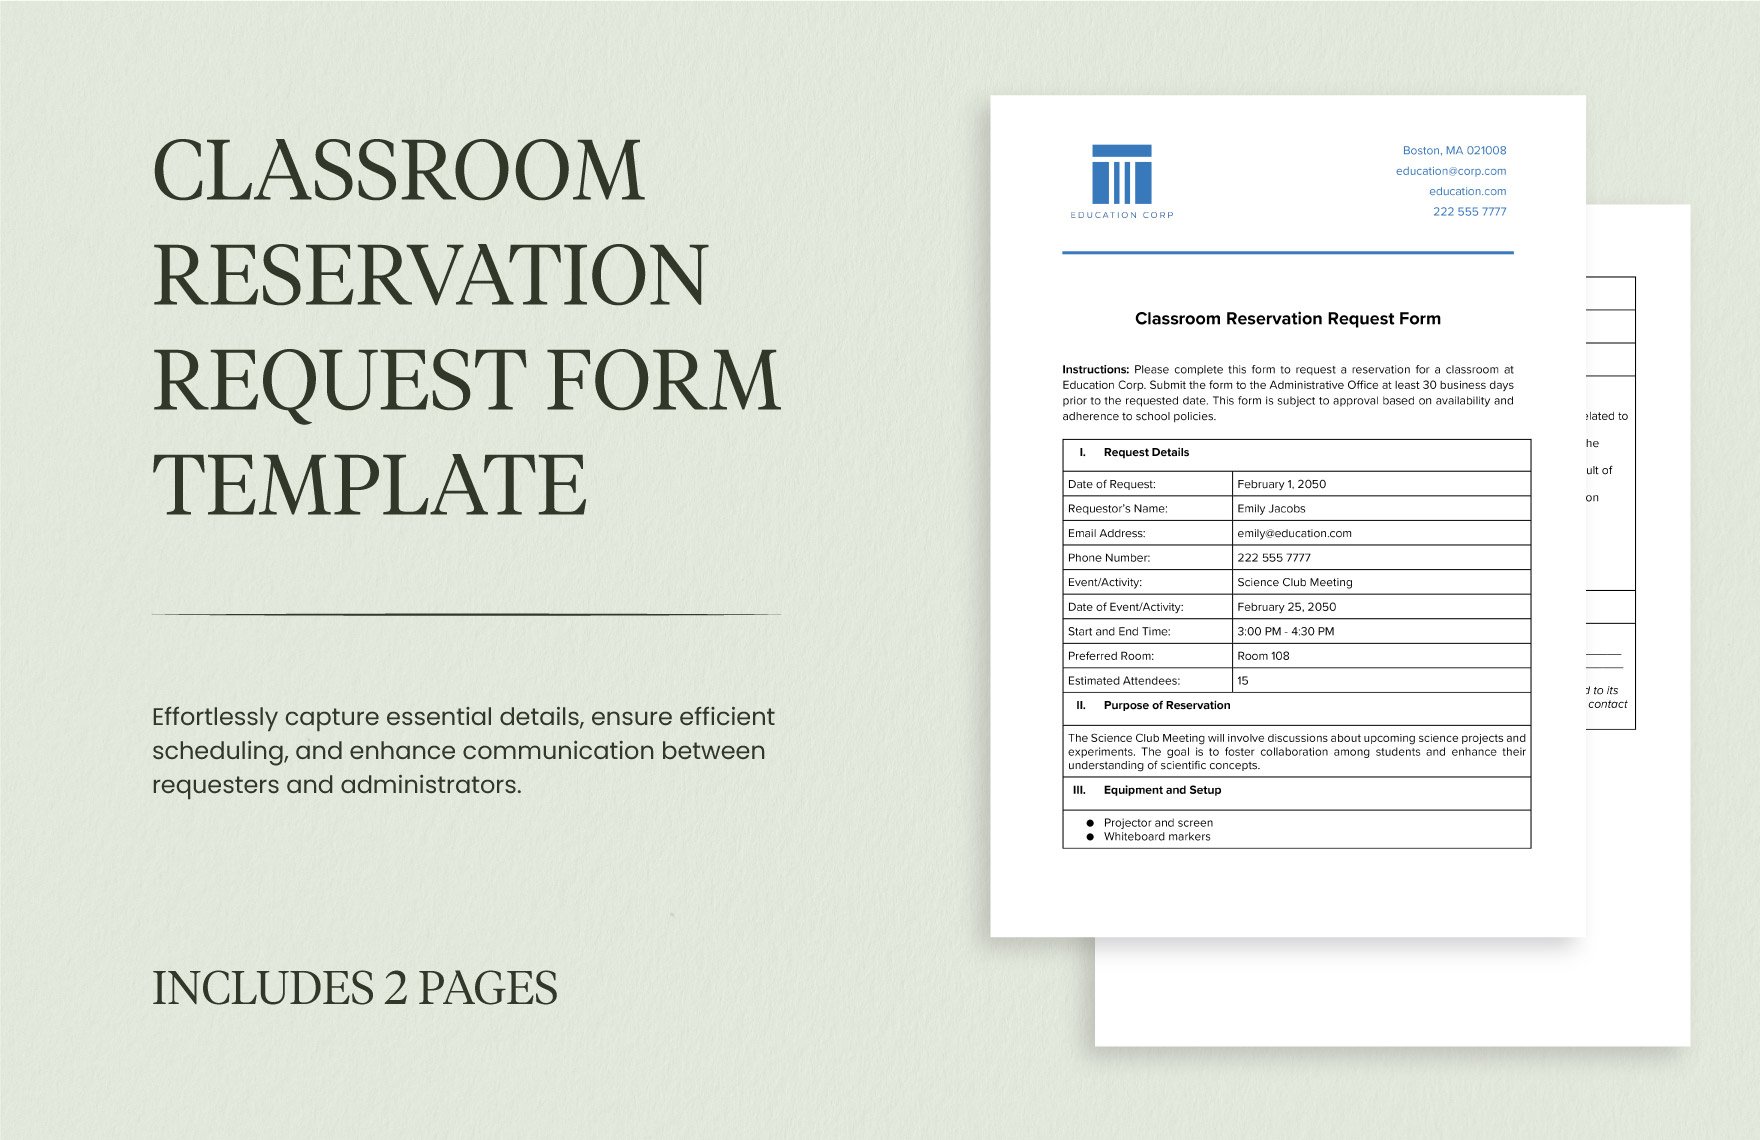 Classroom Reservation Request Form Template in Word, Google Docs, PDF